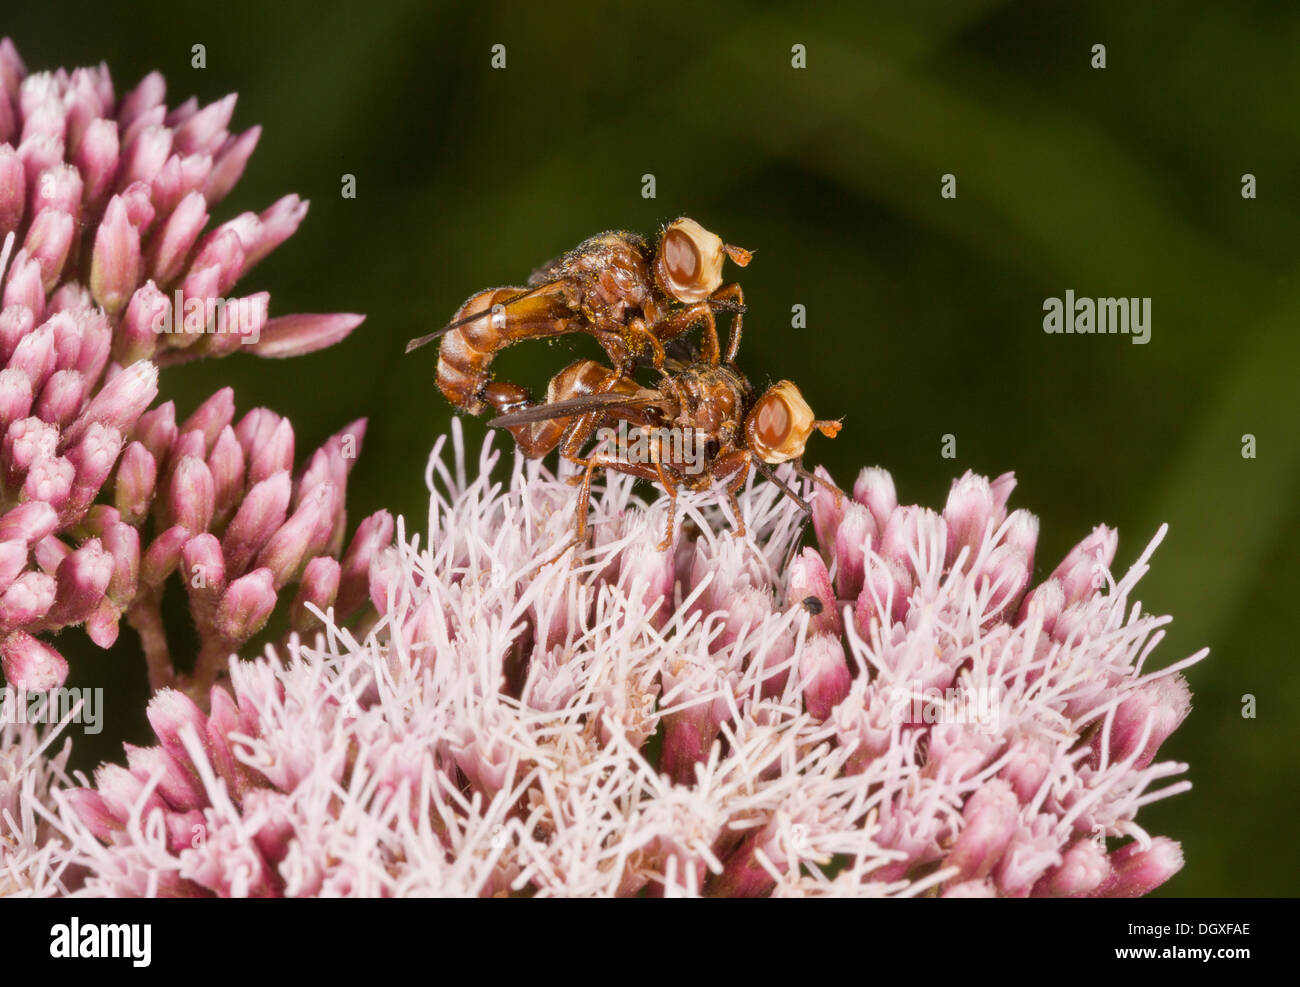 Mating pair of conopid flies, prob. Myopa buccata, on Hemp Agrimony. Endoparasite of bumble bees. Stock Photo